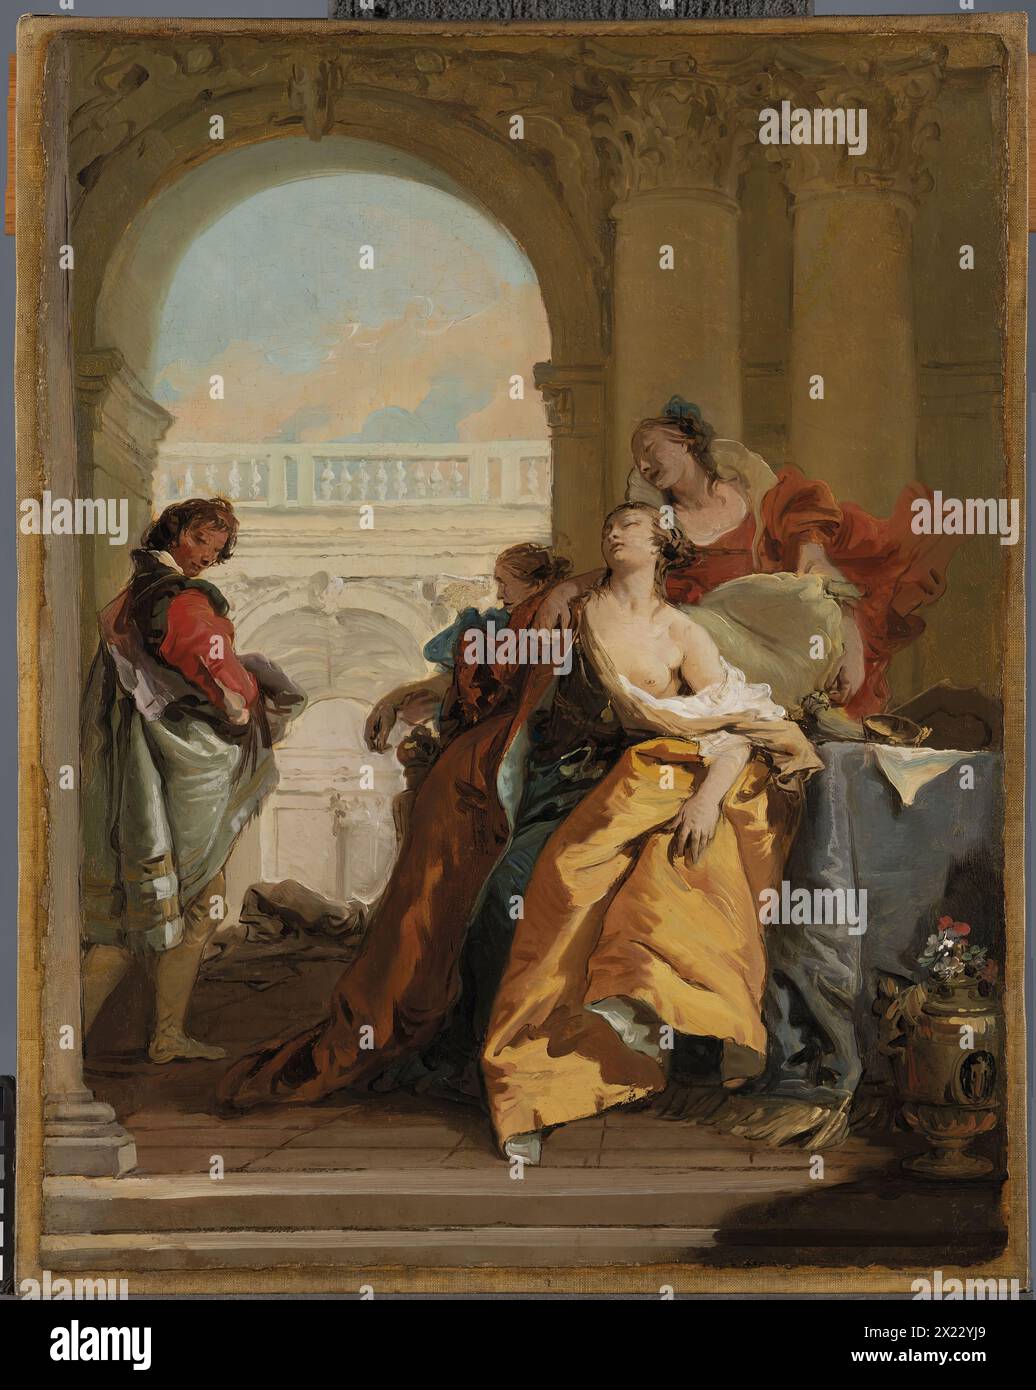 The Death of Sophonisba, 1760. Sophonisba, who lived from 235 to 203BC, was Queen of Numidia and daughter of the Carthaginian general Hasdrubal. She married one of the Numidian chiefs, Syphax, an ally of Rome, but succeeded in dissuading him against his commitments to the Republic. Syphax was defeated at the battle of Utica by Masinissa, another Numidian chief, whom Sophonisba married, having been betrothed to him before her marriage to Syphax. Worried that this new union would also result in the defection of an ally from the Roman side, Scipio Africanus ordered Masinissa to hand over Sophonis Stock Photo